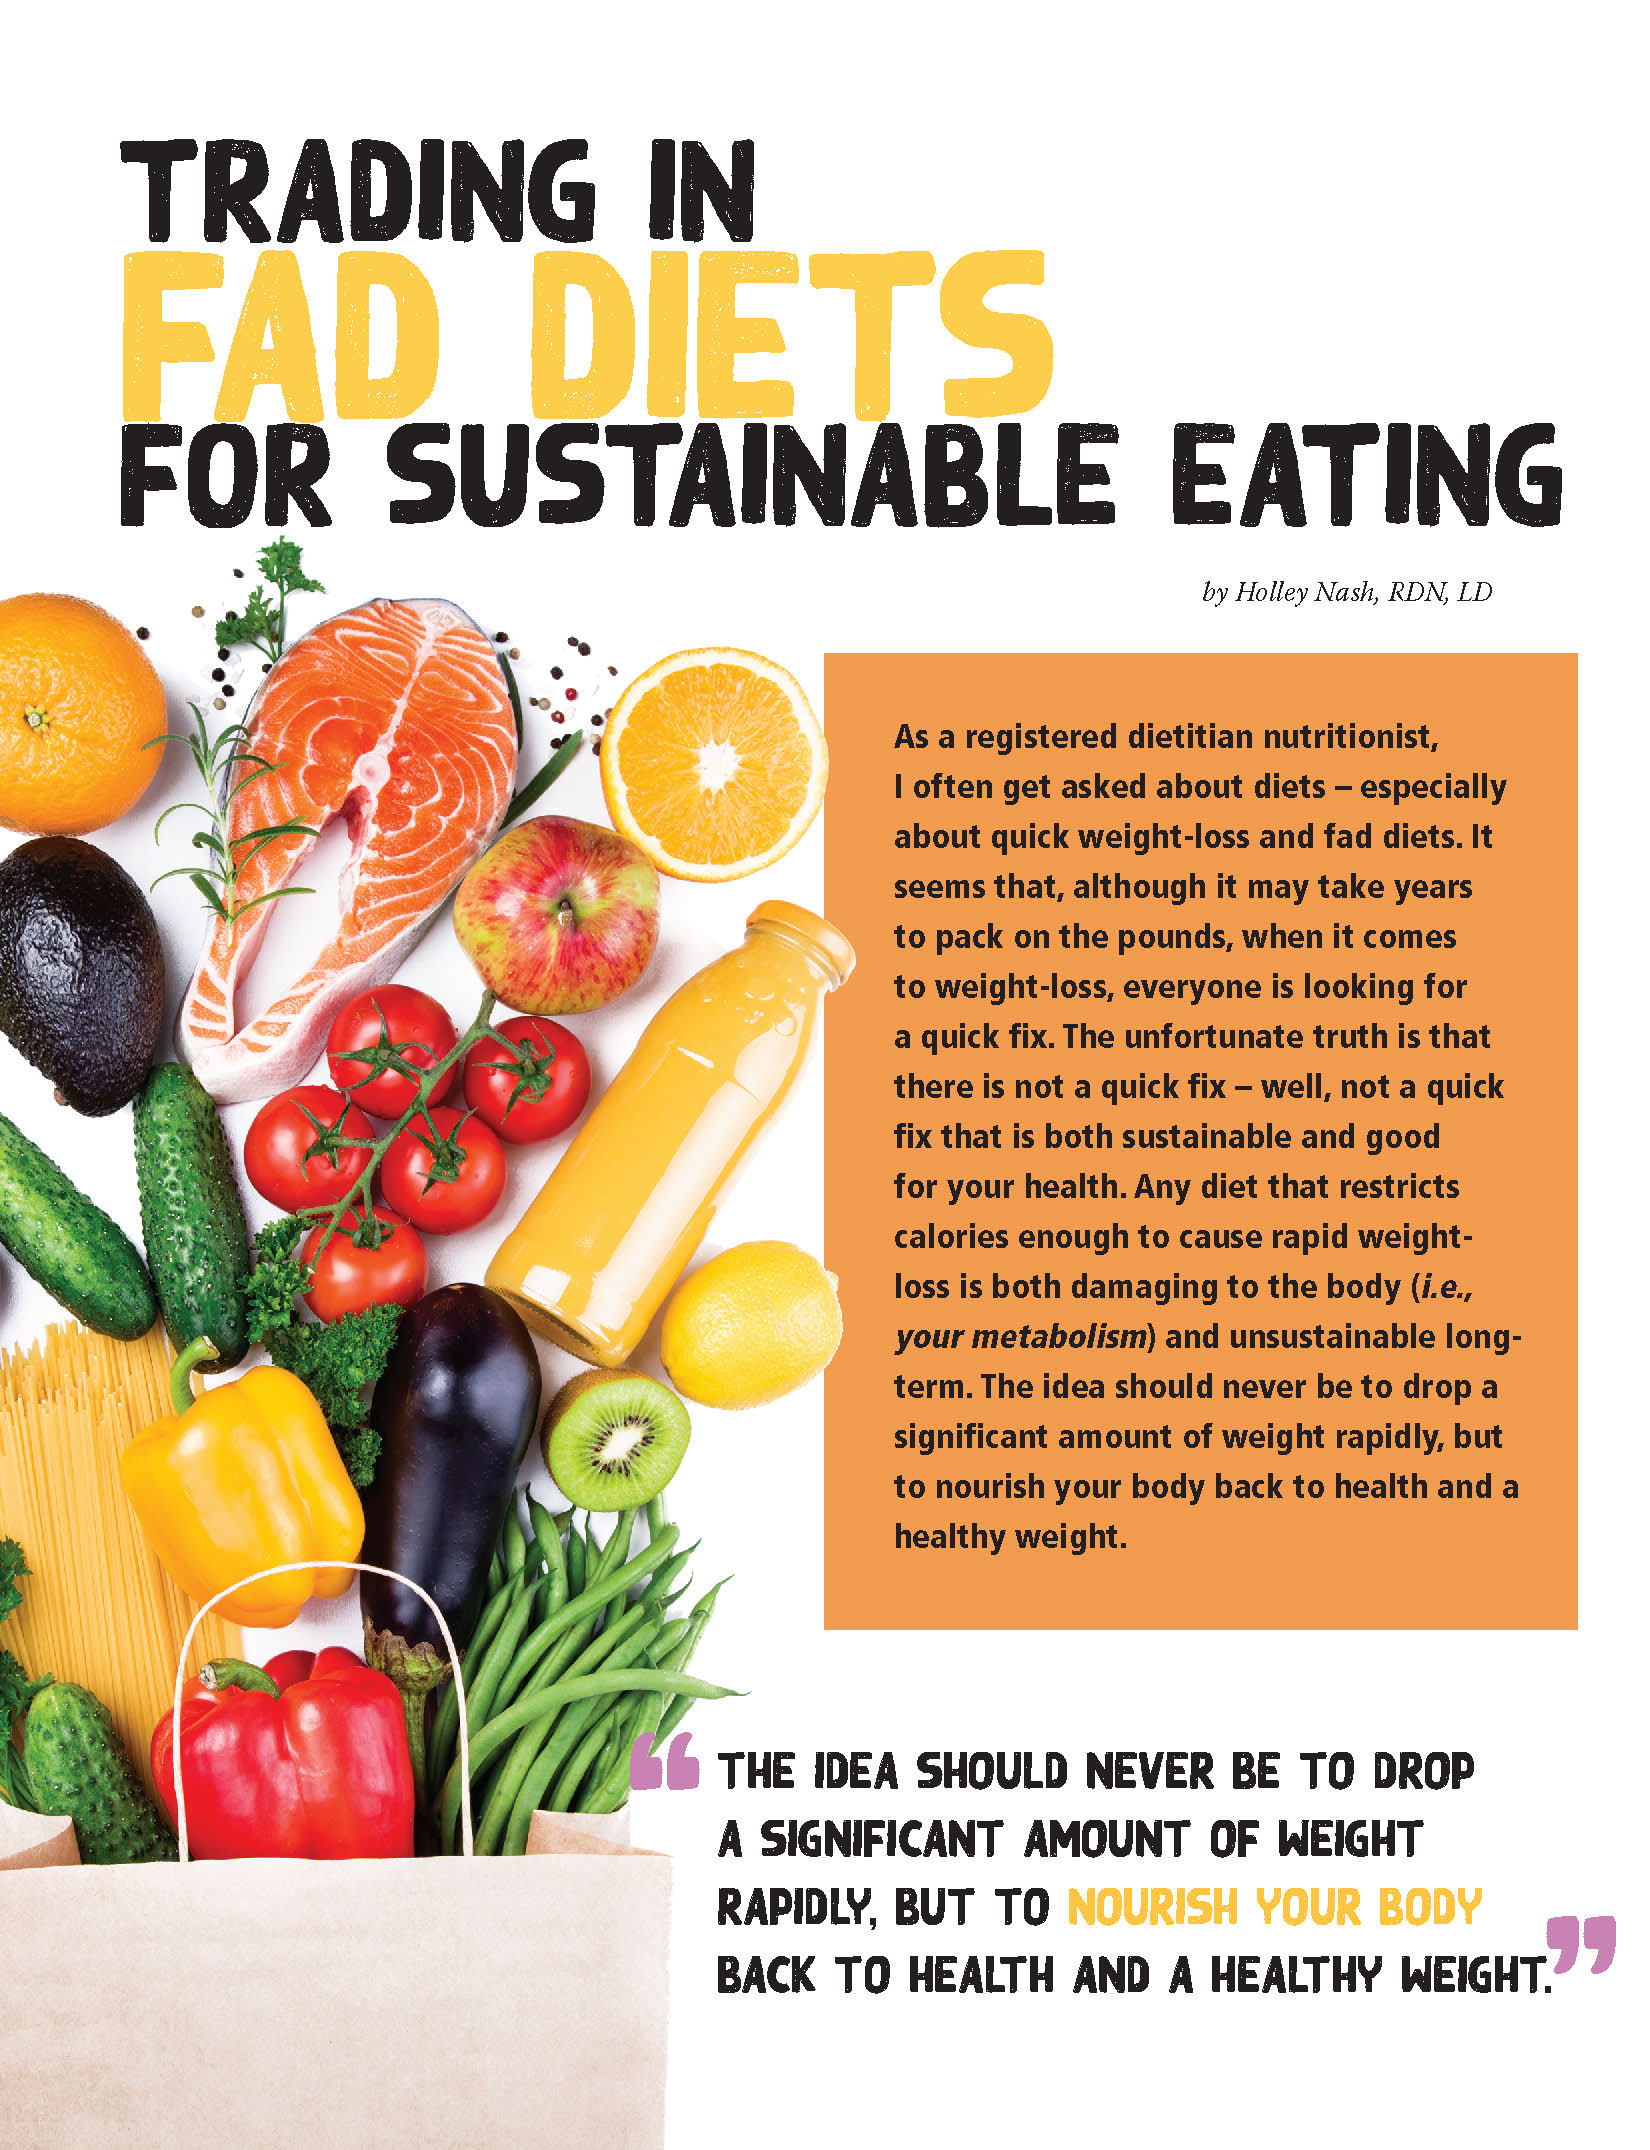 Trading in Fad Diets for Sustainable Eating Obesity Action Coalition